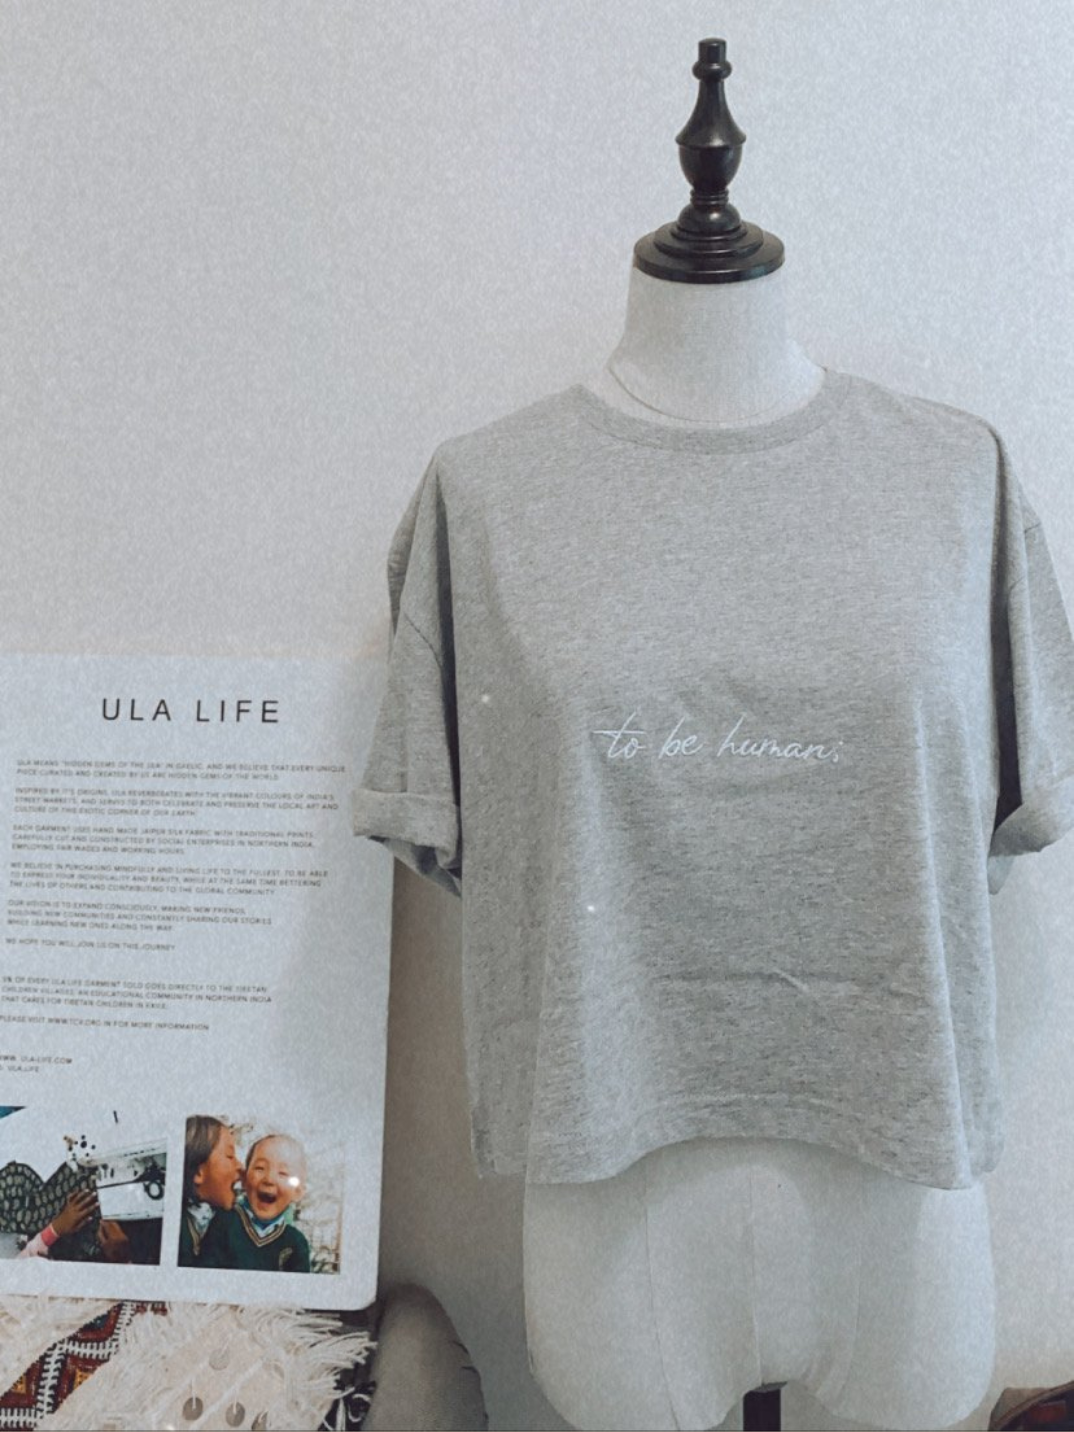 Ula Life To Be Human crop t-shirt 100% organic cotton tee that gives back to help Tibetan children in need